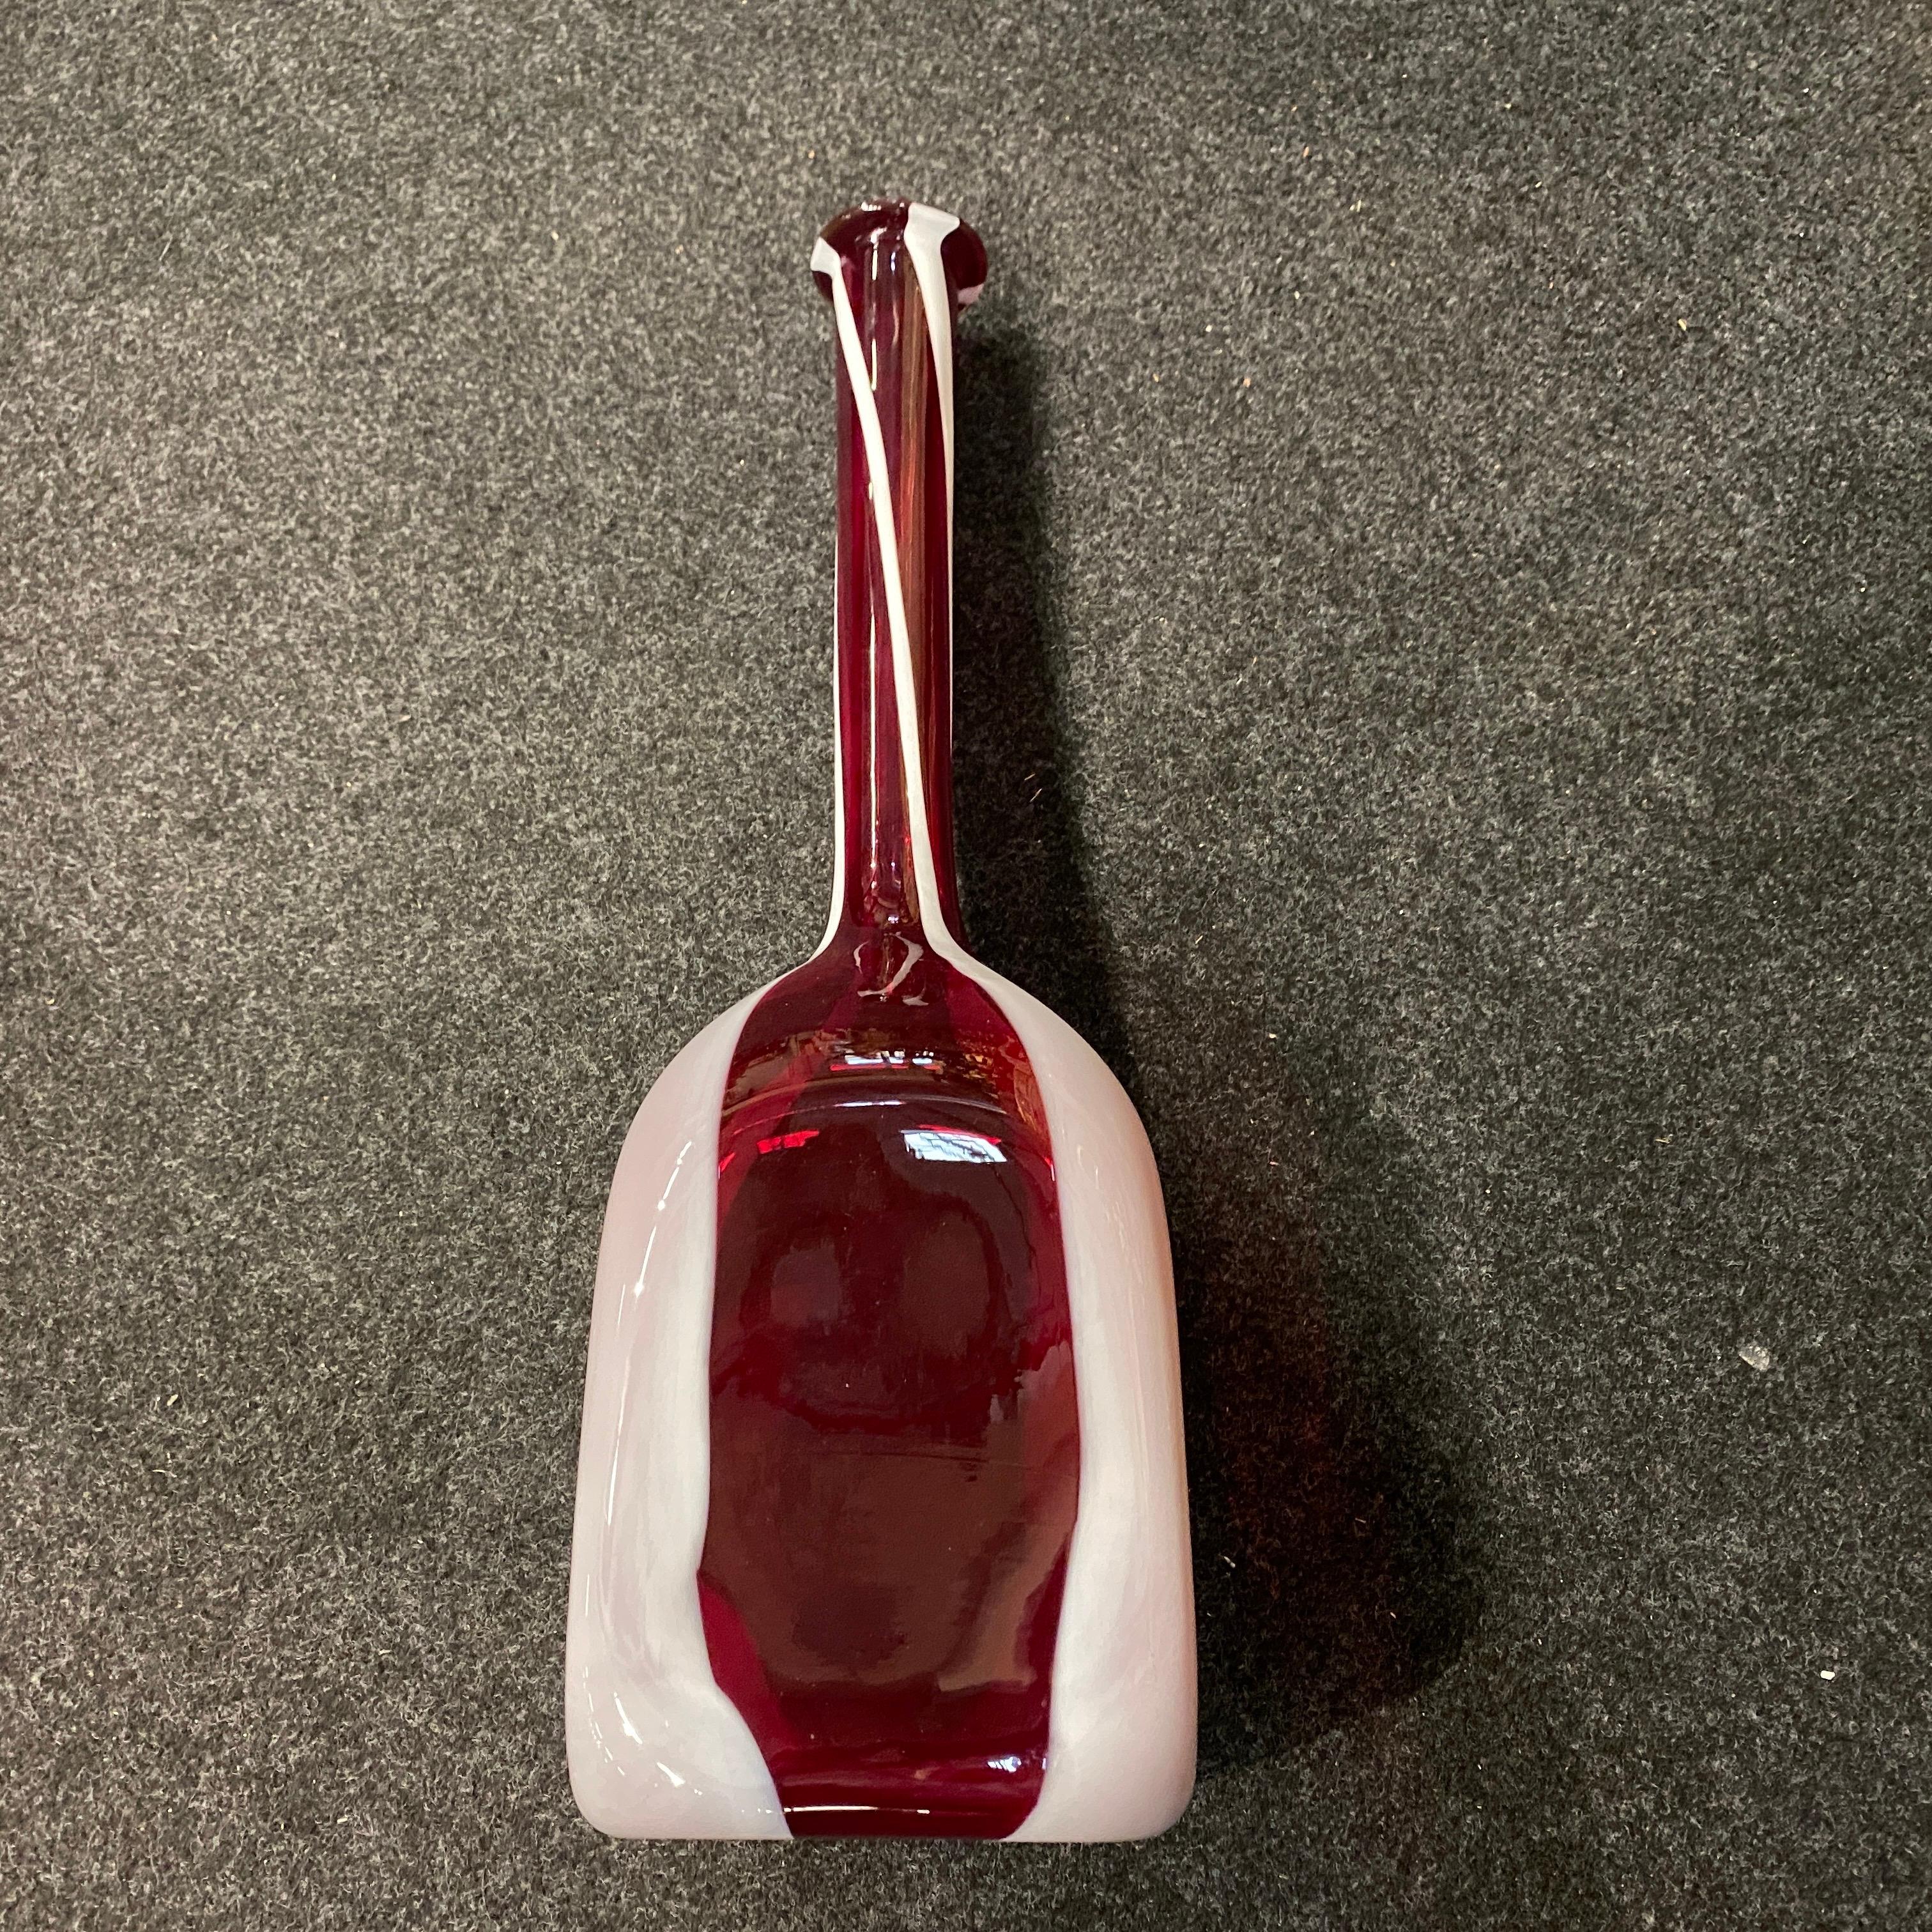 1980s Modernist Red and White Tall Murano Glass Bottle Vase by Carlo Moretti For Sale 5